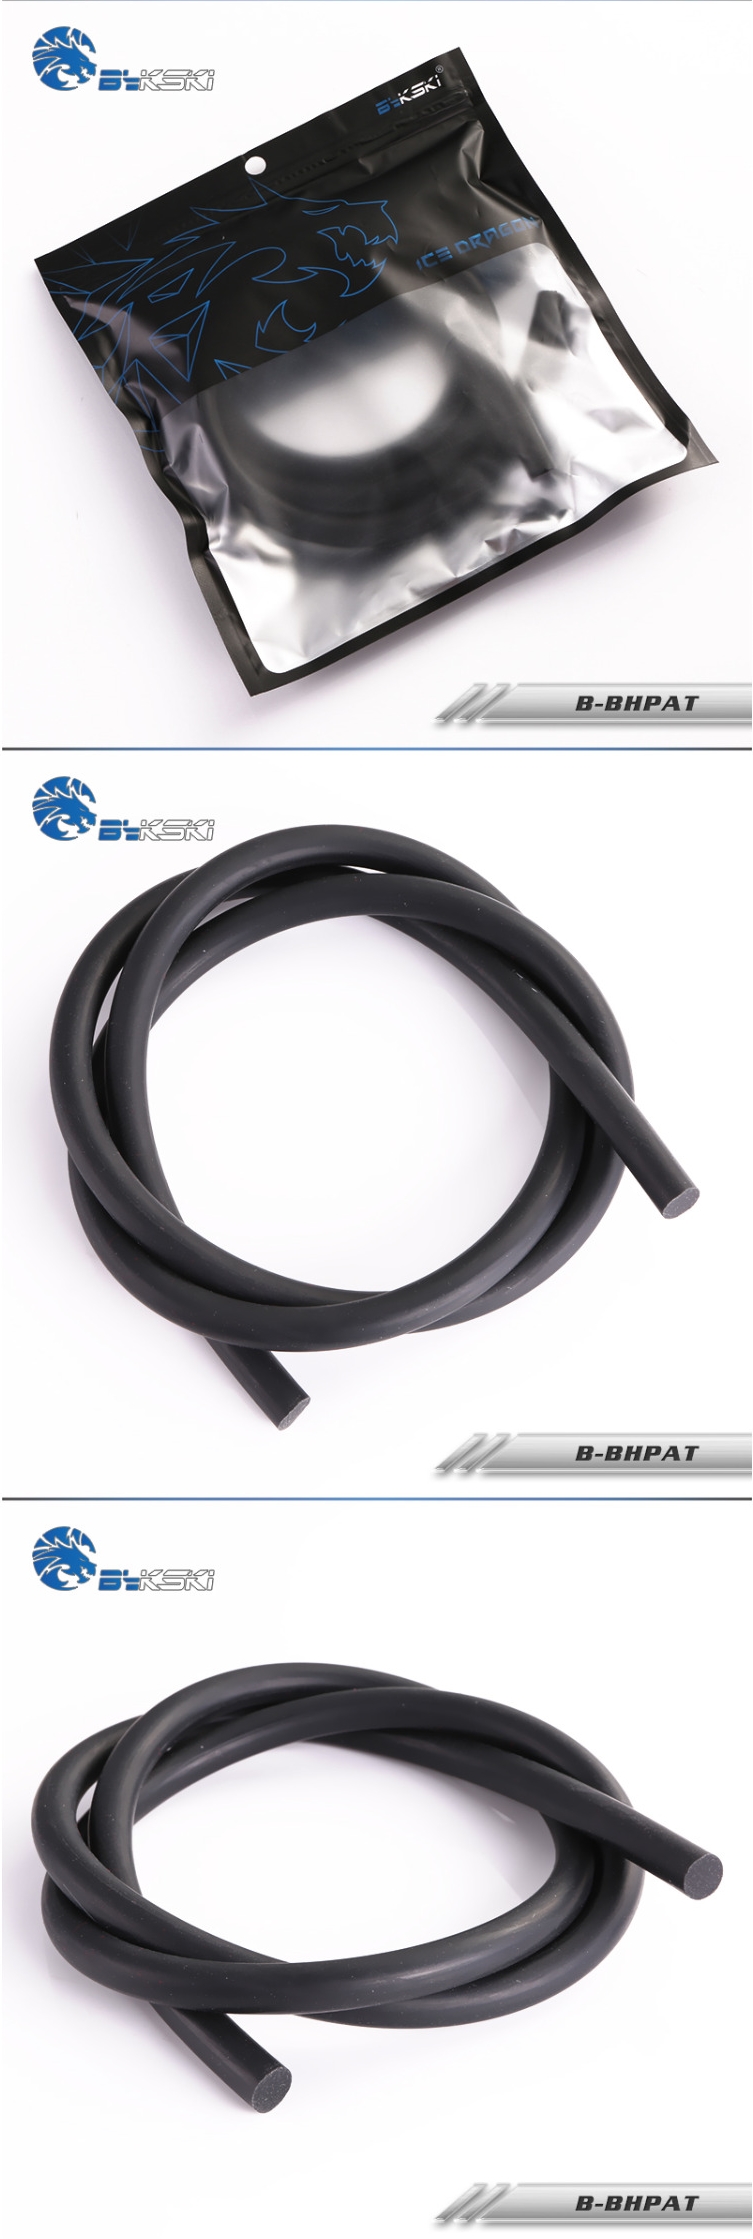 A large marketing image providing additional information about the product Bykski 14/16mm OD Hard Tubing Bend Rubber - Additional alt info not provided